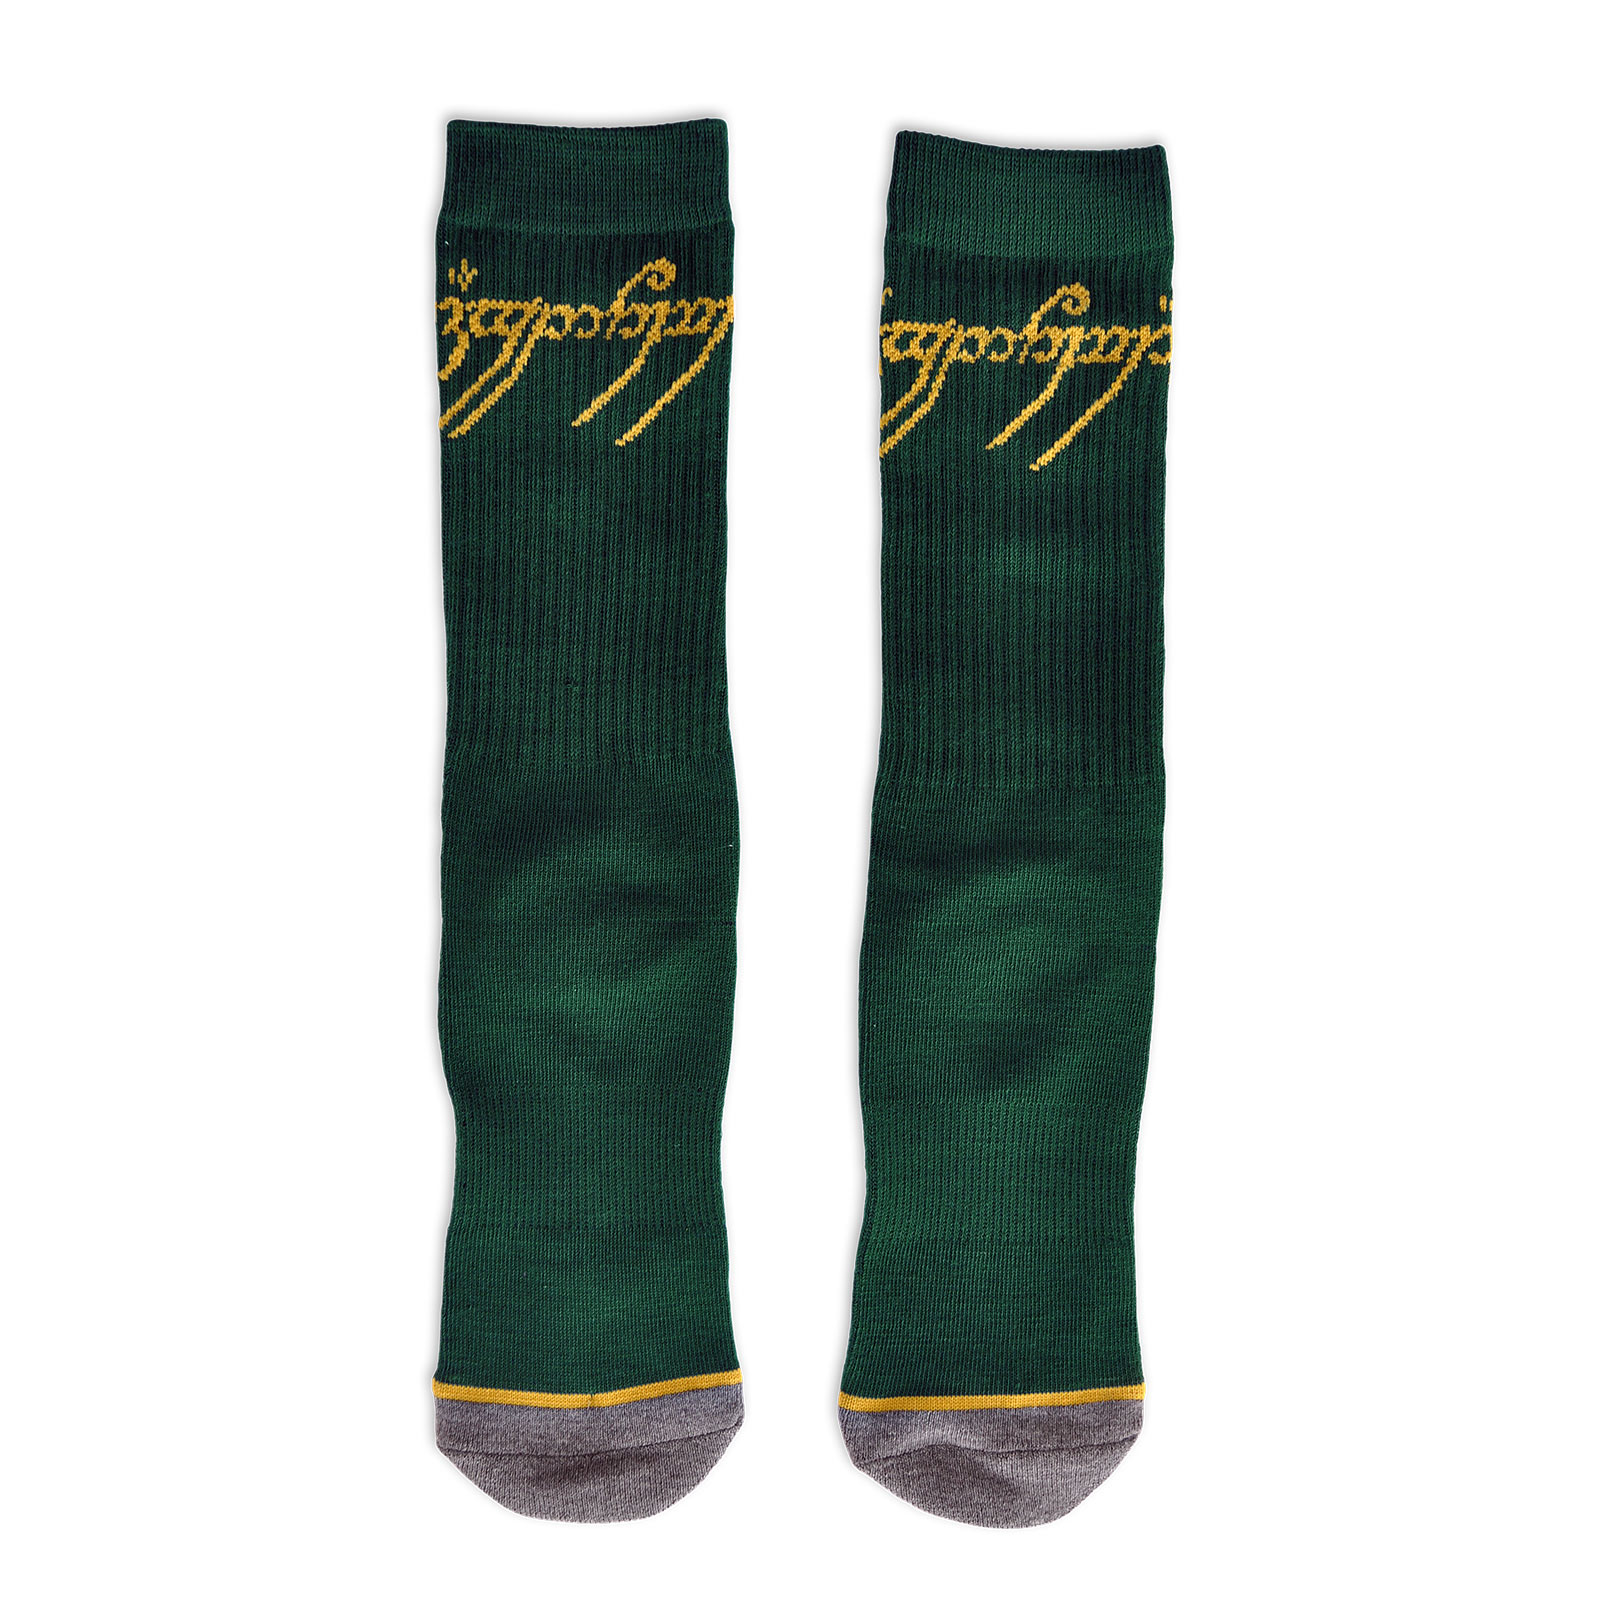 Lord of the Rings - The One Ring Socks